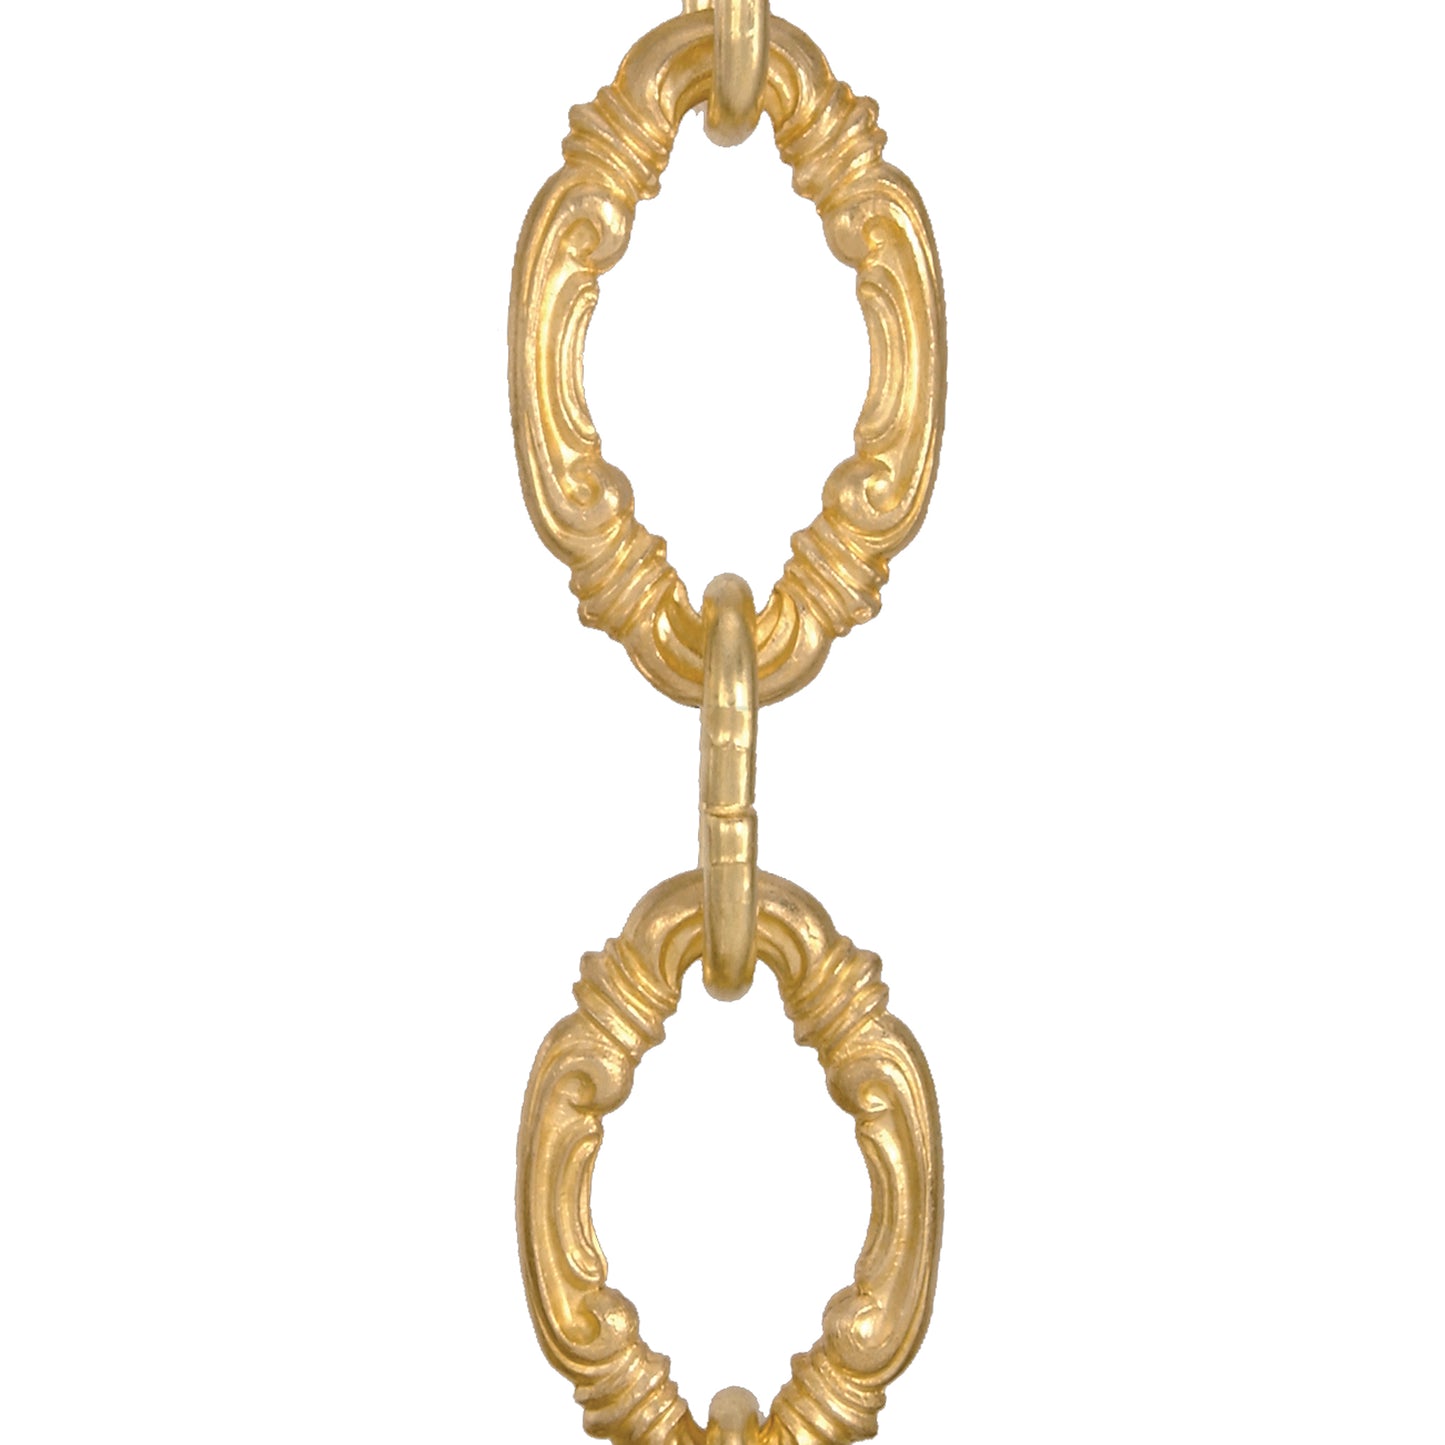 Die Cast, Large Decorative Brass Lamp Chain, Unfinished (13154)